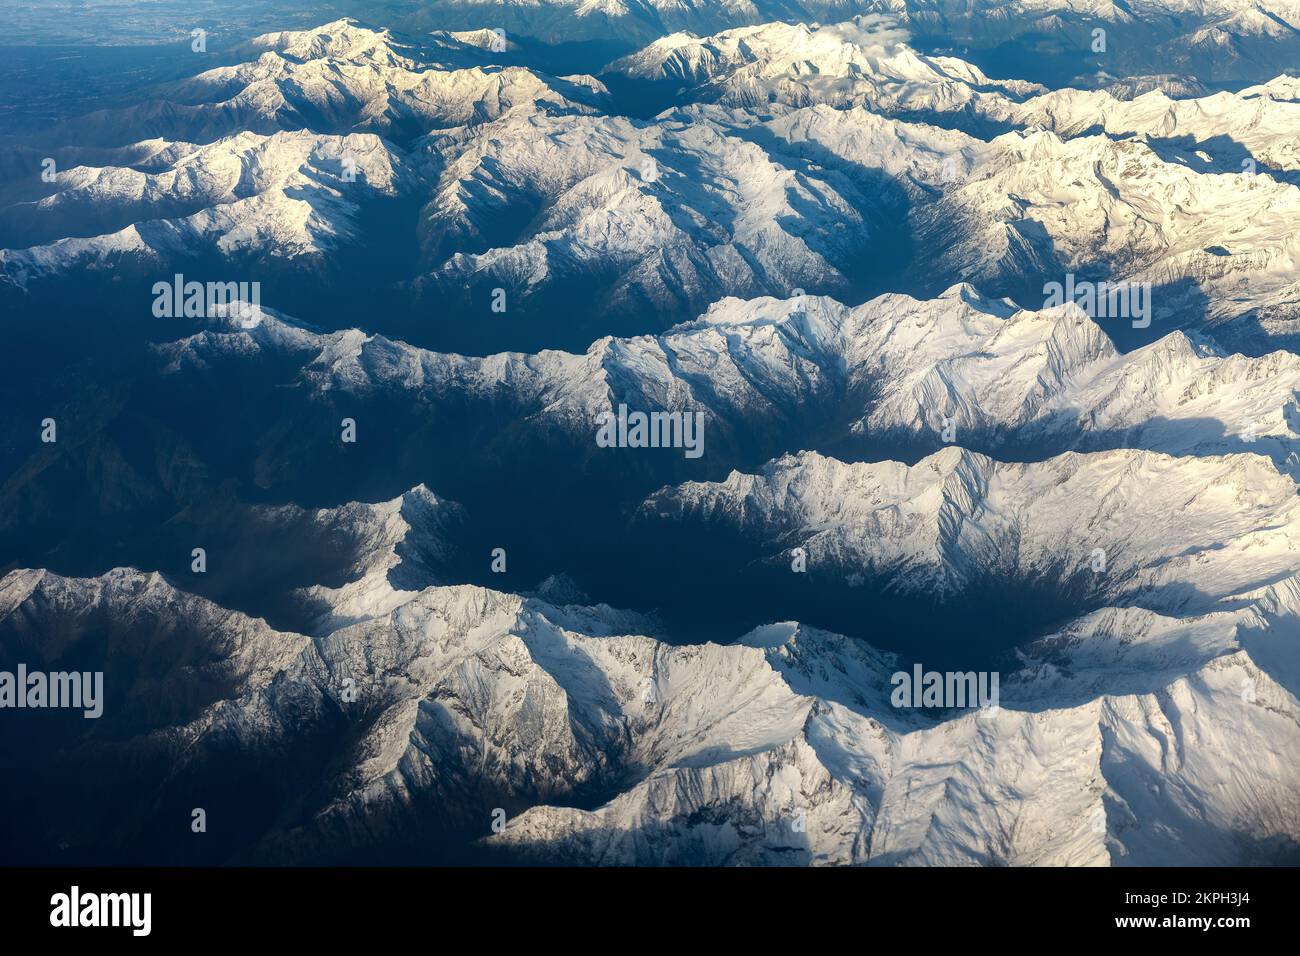 Aerial view of the mountains covered with snow. Stock Photo